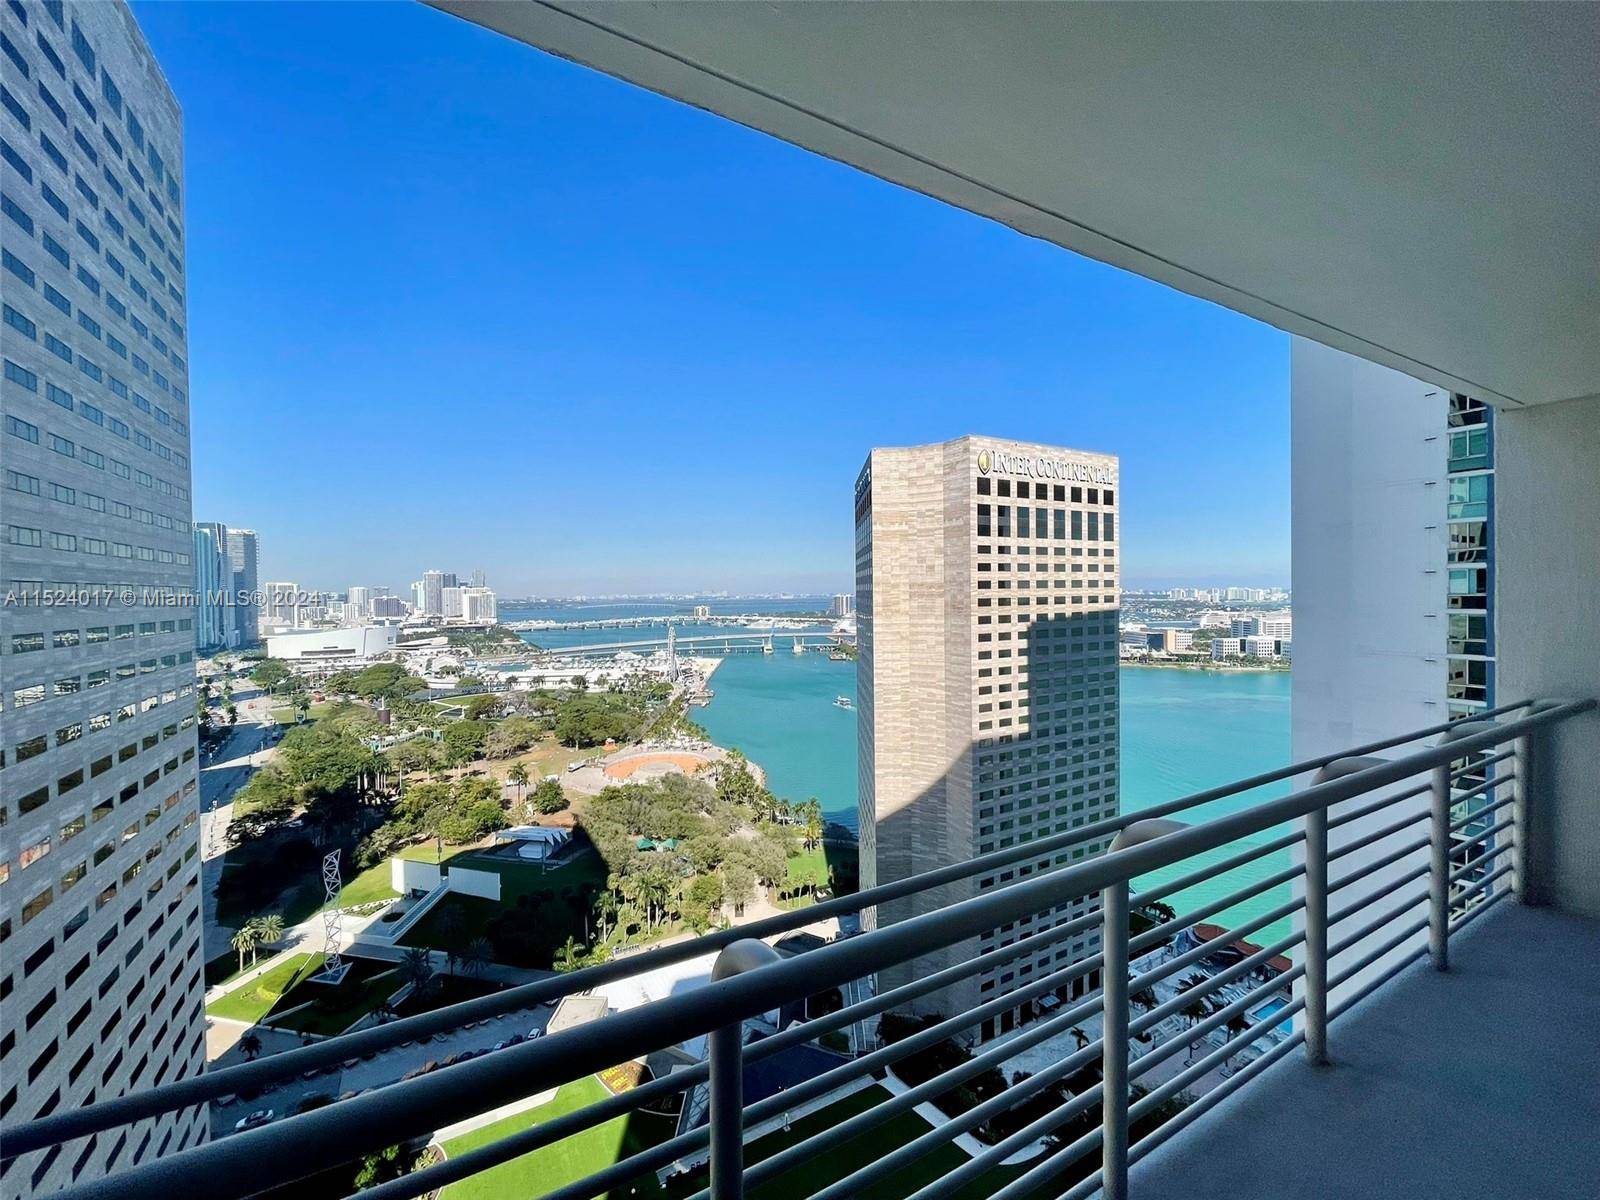 Indulge in breathtaking bay views from this exquisite condo situated on the 31st floor at One Miami.